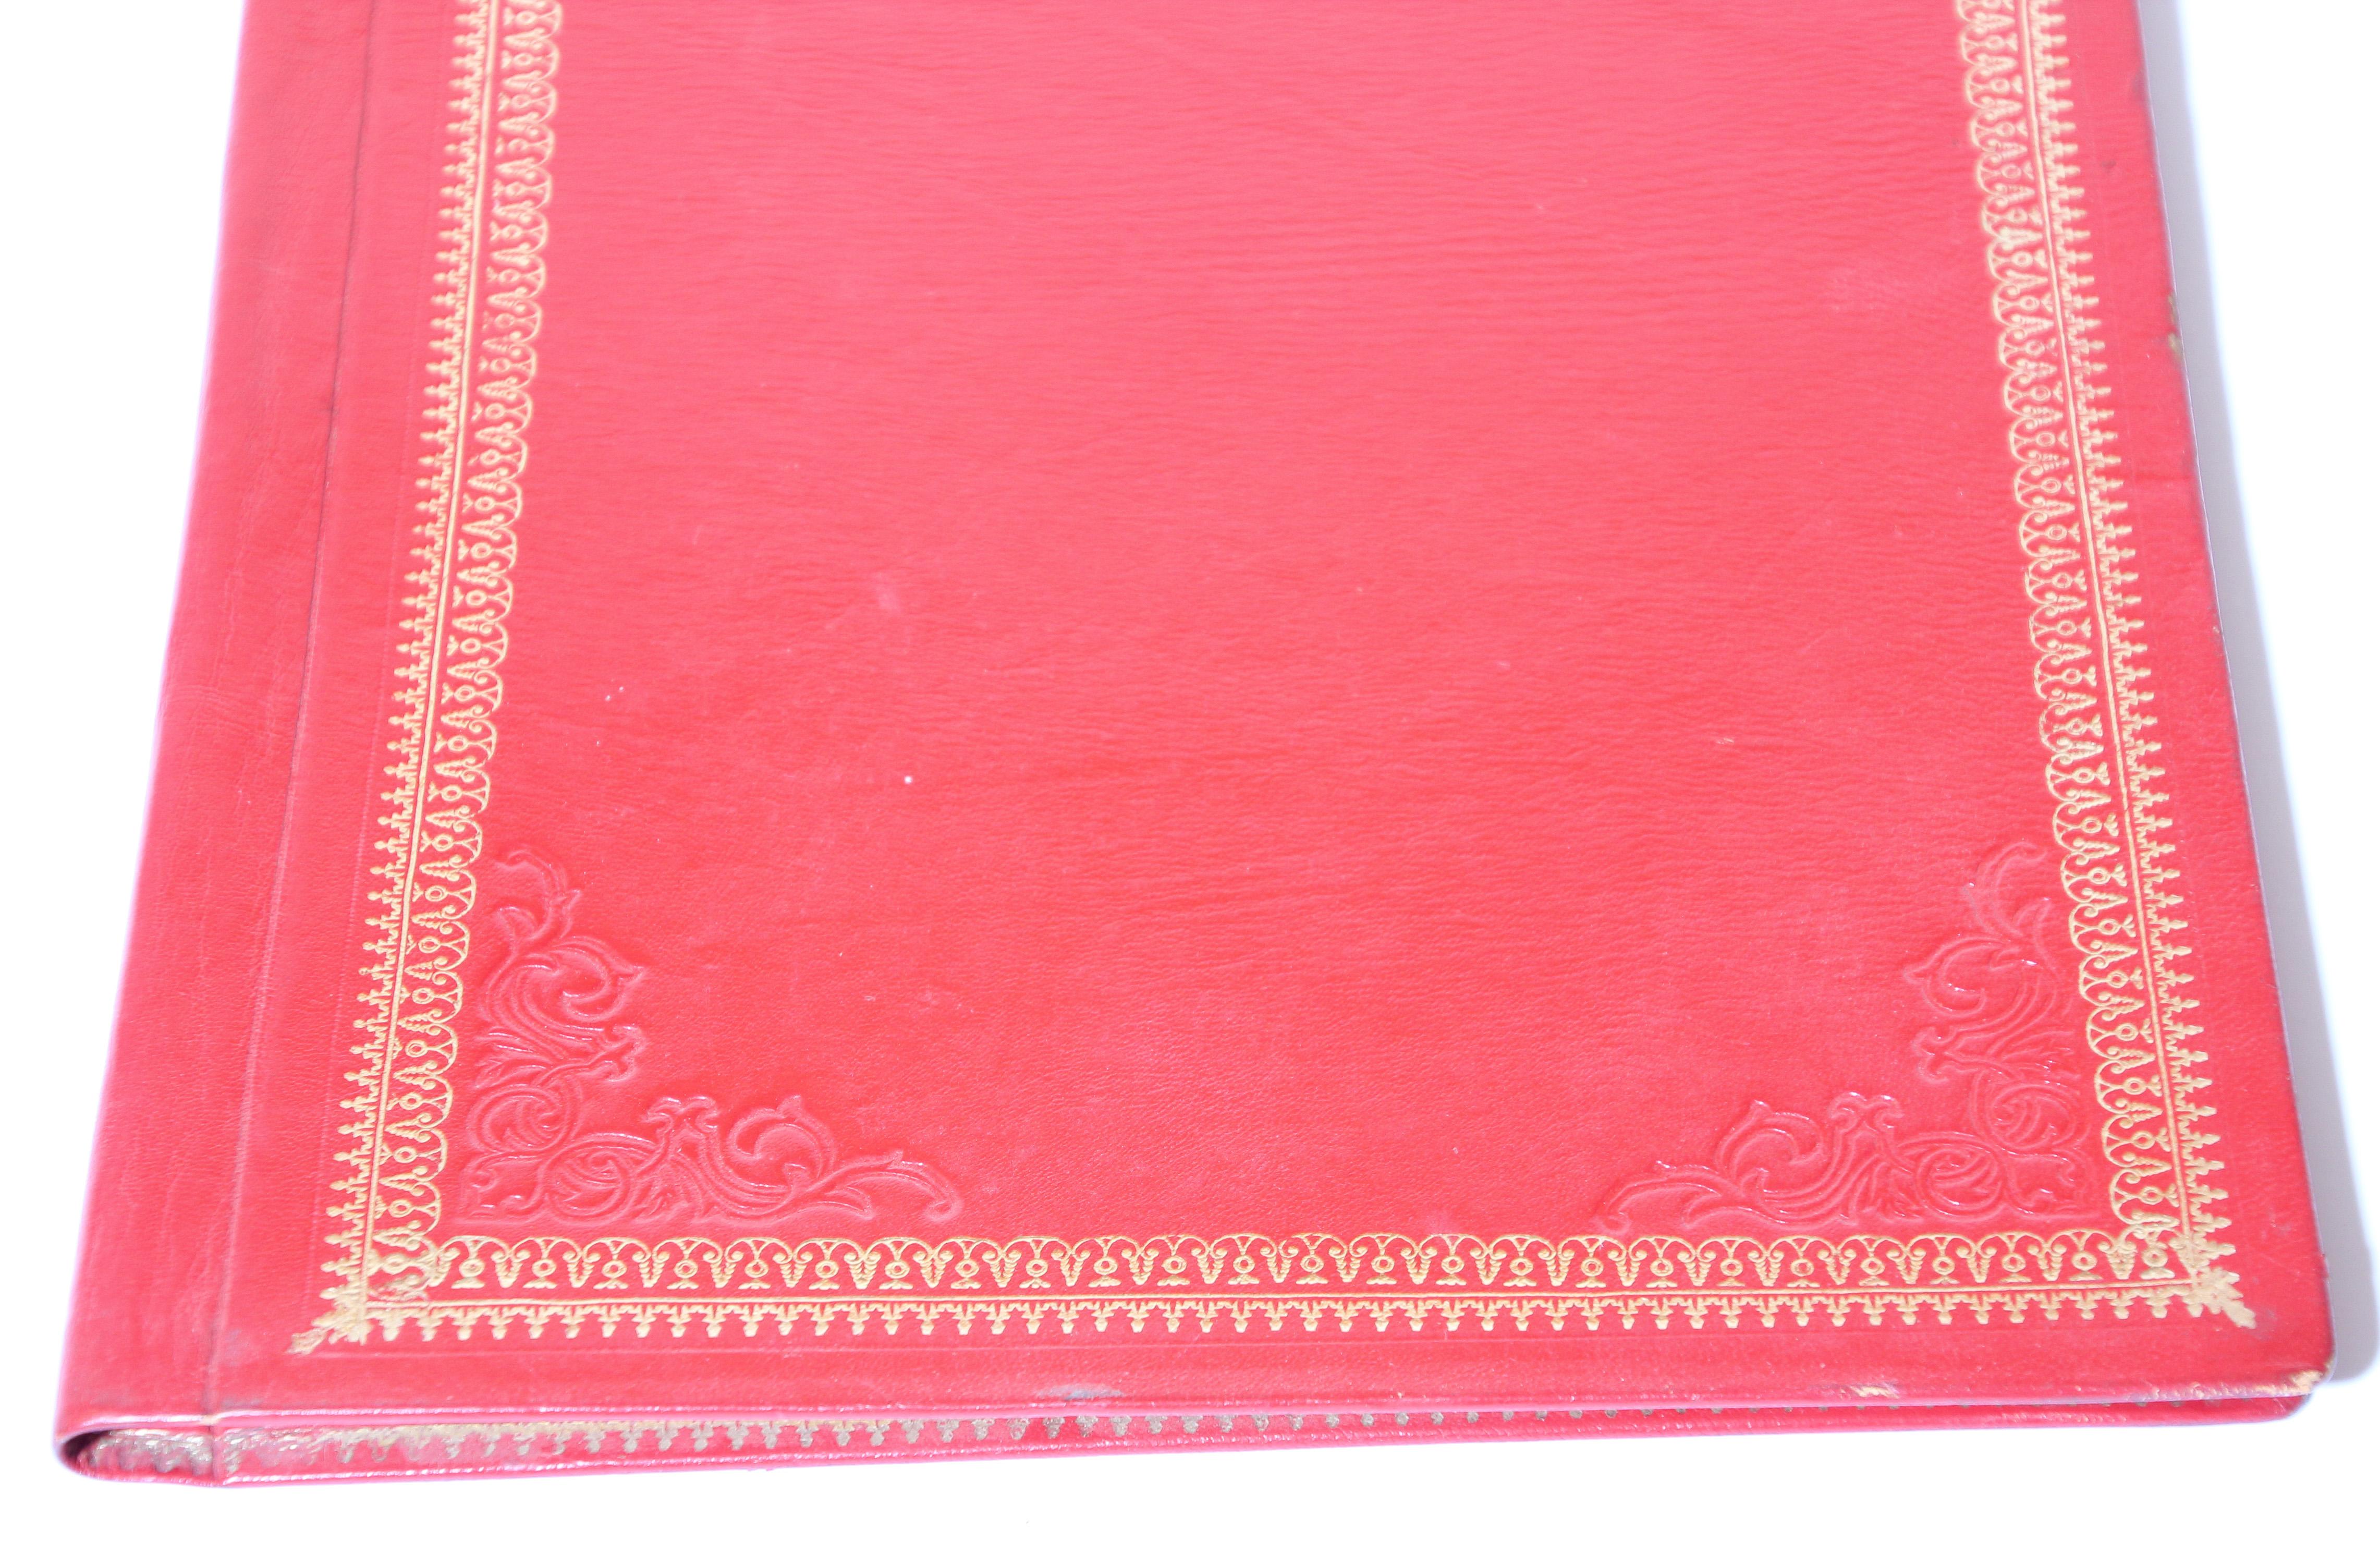 Hand-Crafted Vintage Moroccan Embossed Leather Padfolio For Sale